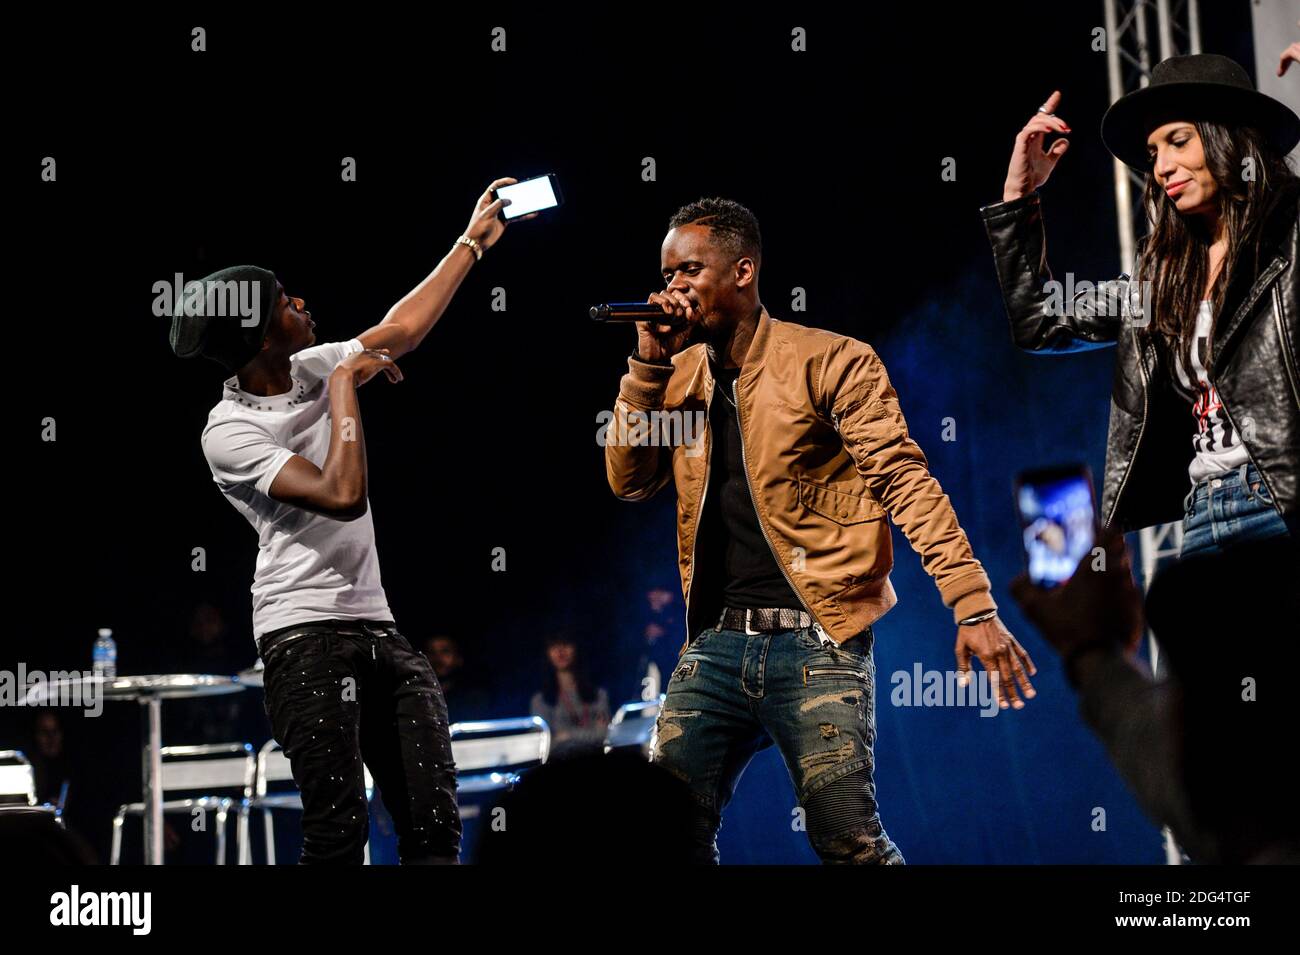 MHD, Black M, Zaho during a concert for 1000th radio program Equipe De Nuit  of Radio Scoop in Lyon, France on February 1st, 2017. Photo by Julien  Reynaud/APS-Medias/ABACAPRESS.COM Stock Photo - Alamy